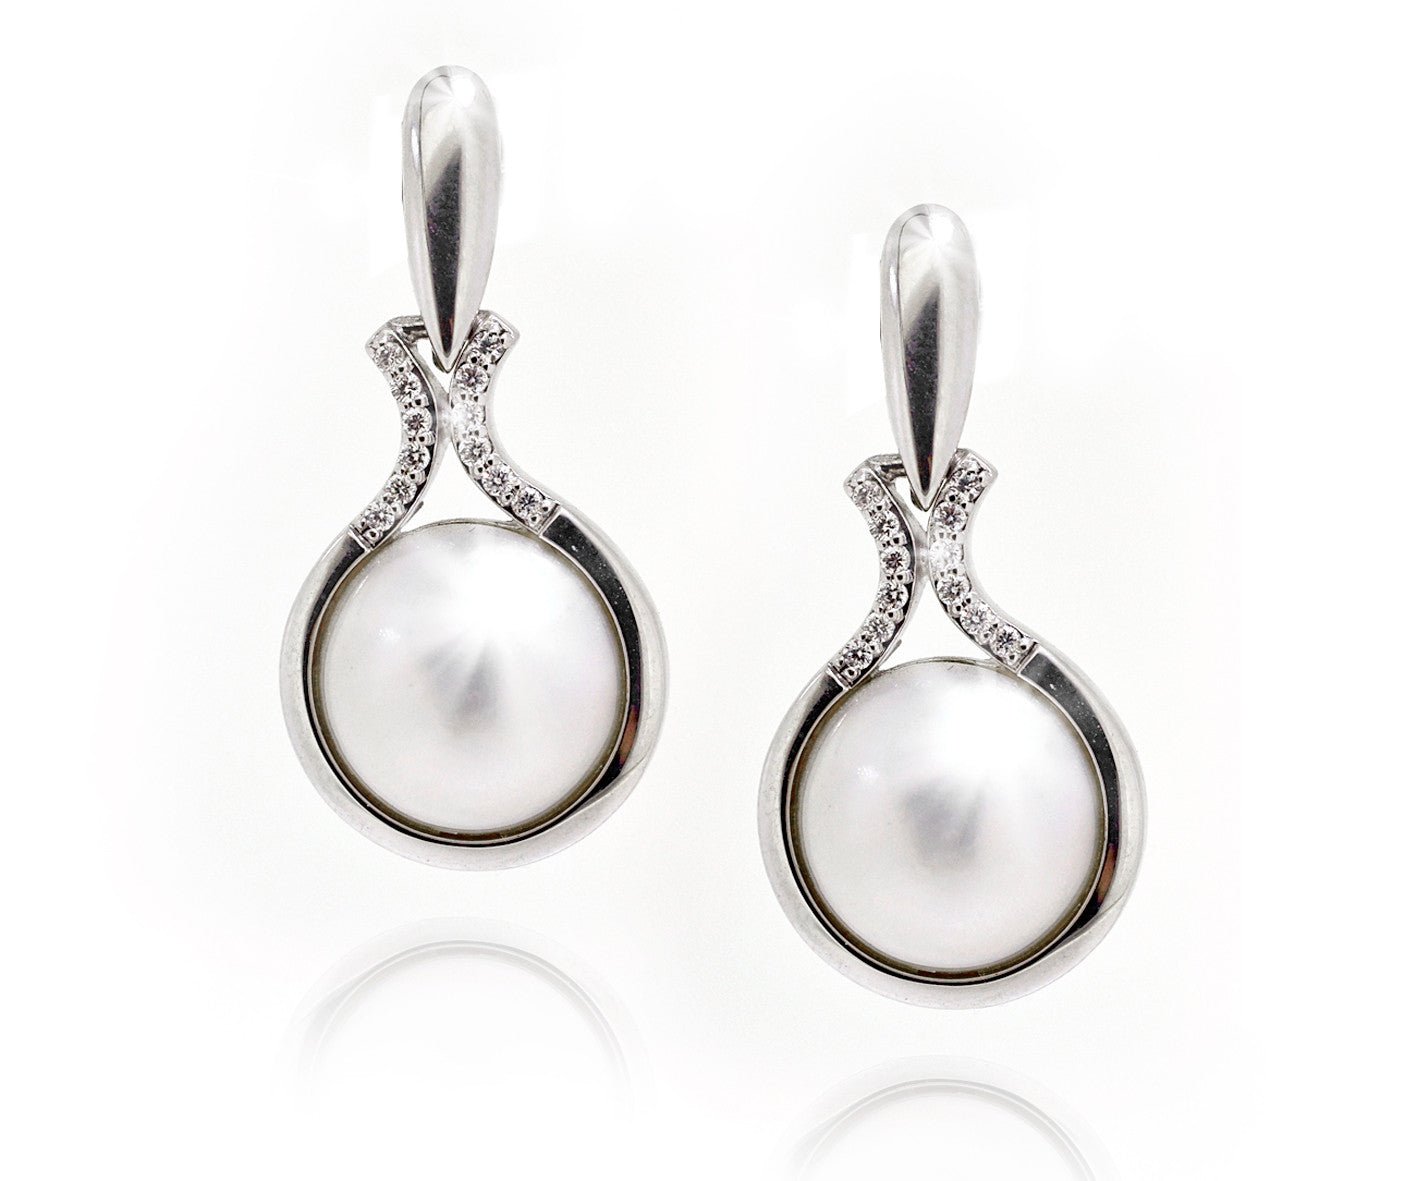 18ct White gold mabe pearl and diamond earrings - ForeverJewels Design Studio 8